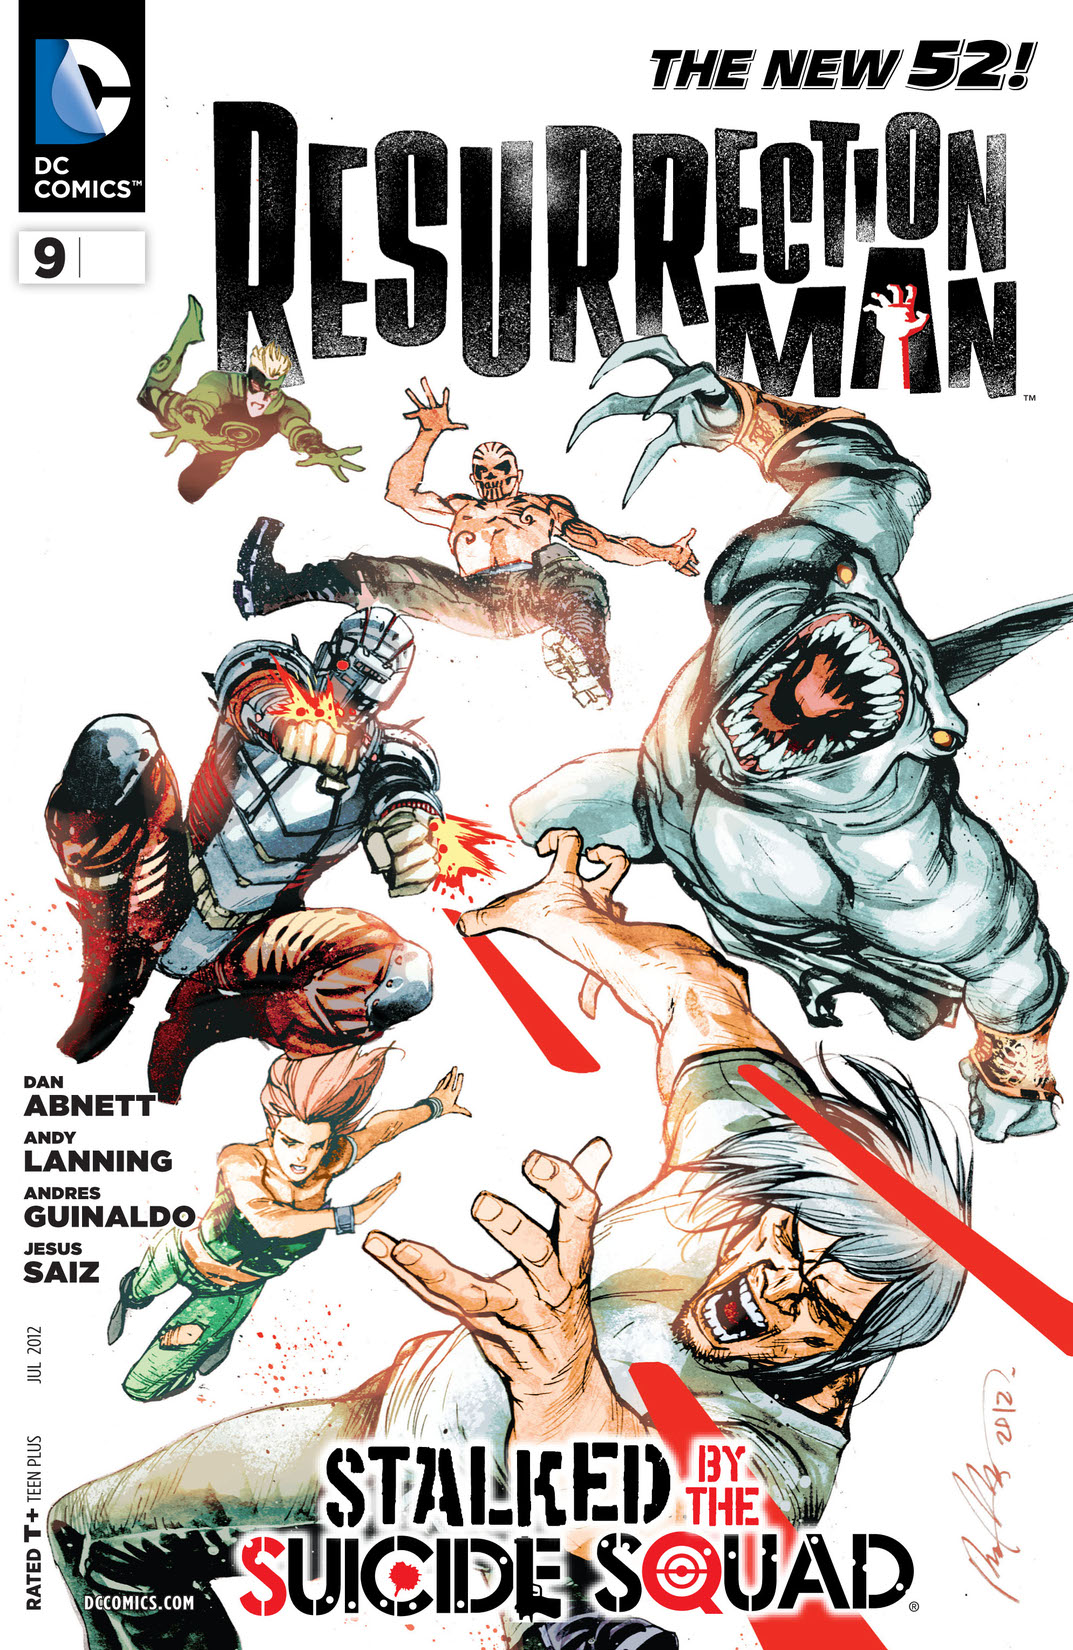 Resurrection Man (2011-) #9 preview images